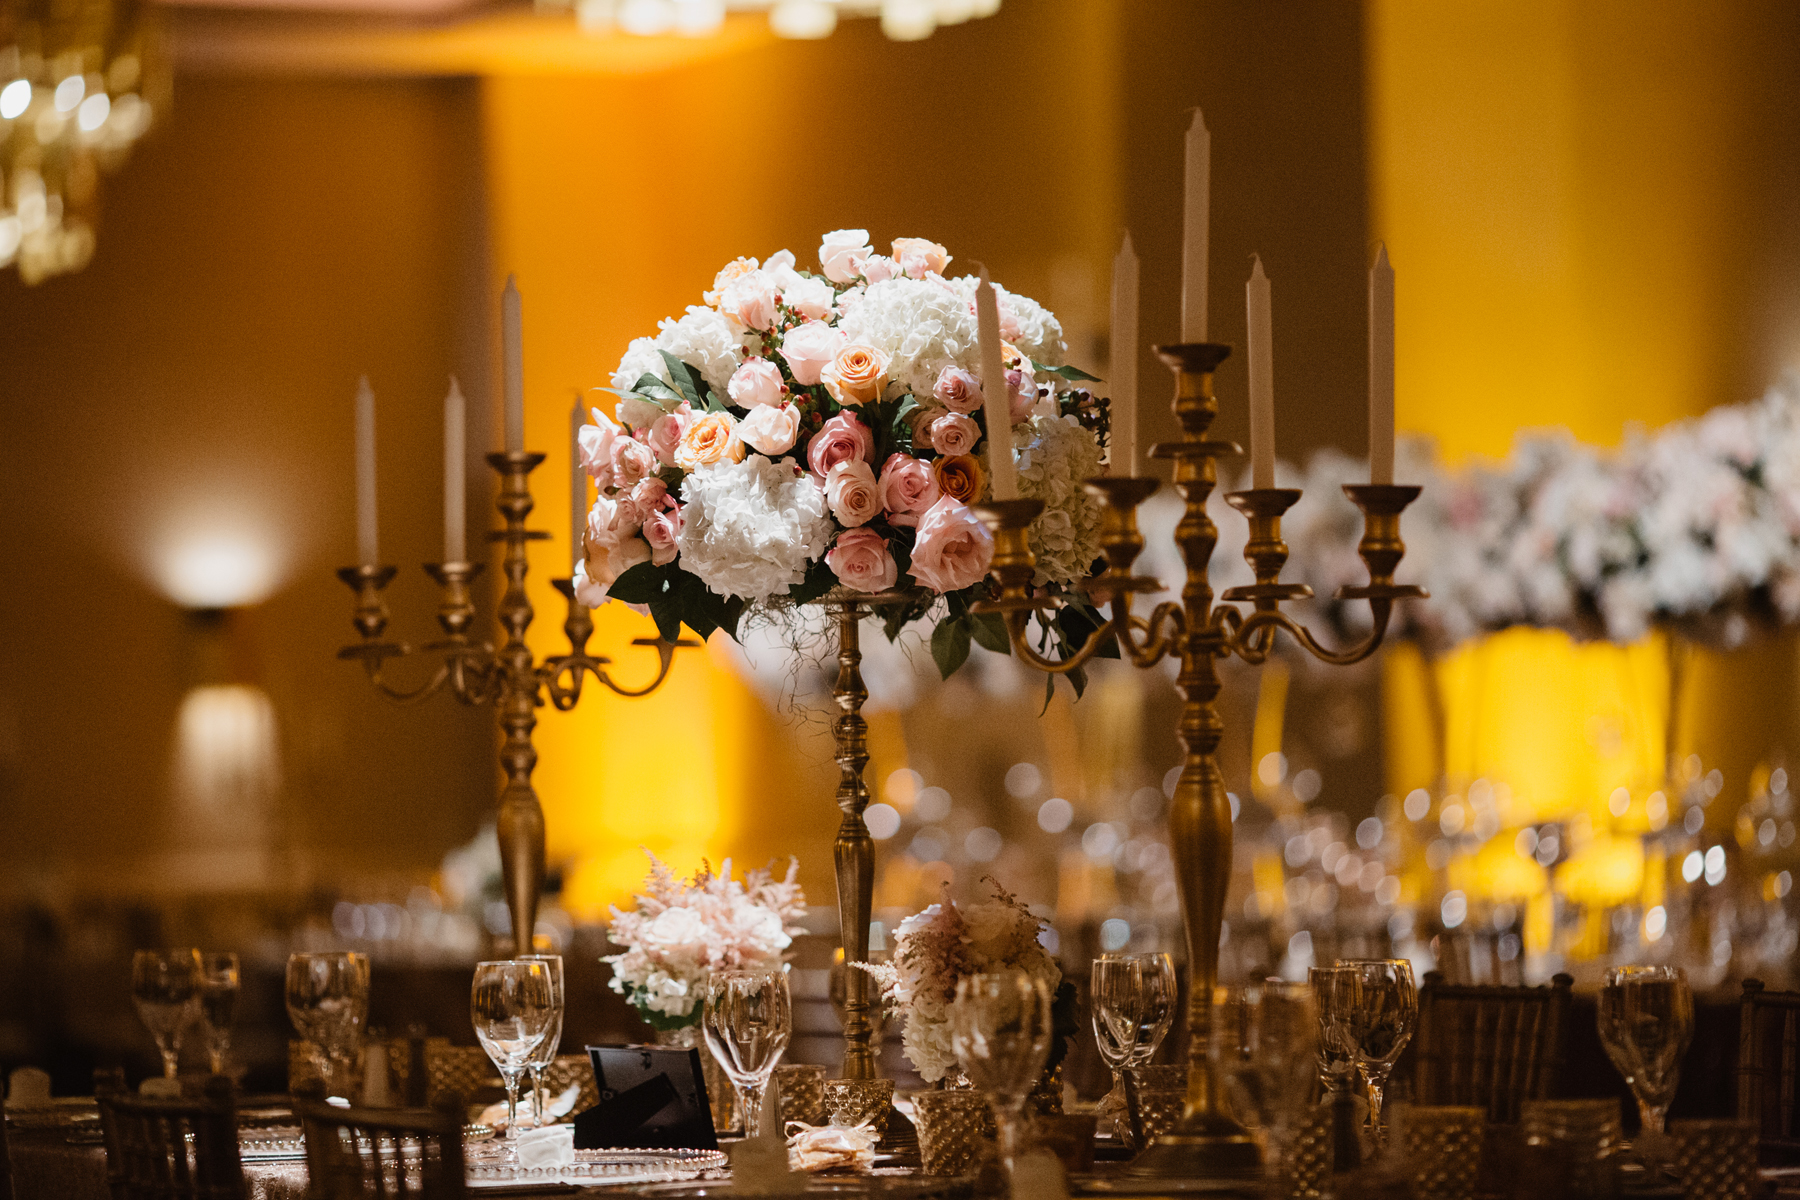  daytoremember.net | Blue Rose Photography | Cathedral Basilica of St. Francis of Assisi | El Dorado Hotel &amp; Spa | A Day To Remember Houston Luxury Wedding Planning and Design | Luxury Destination Wedding 